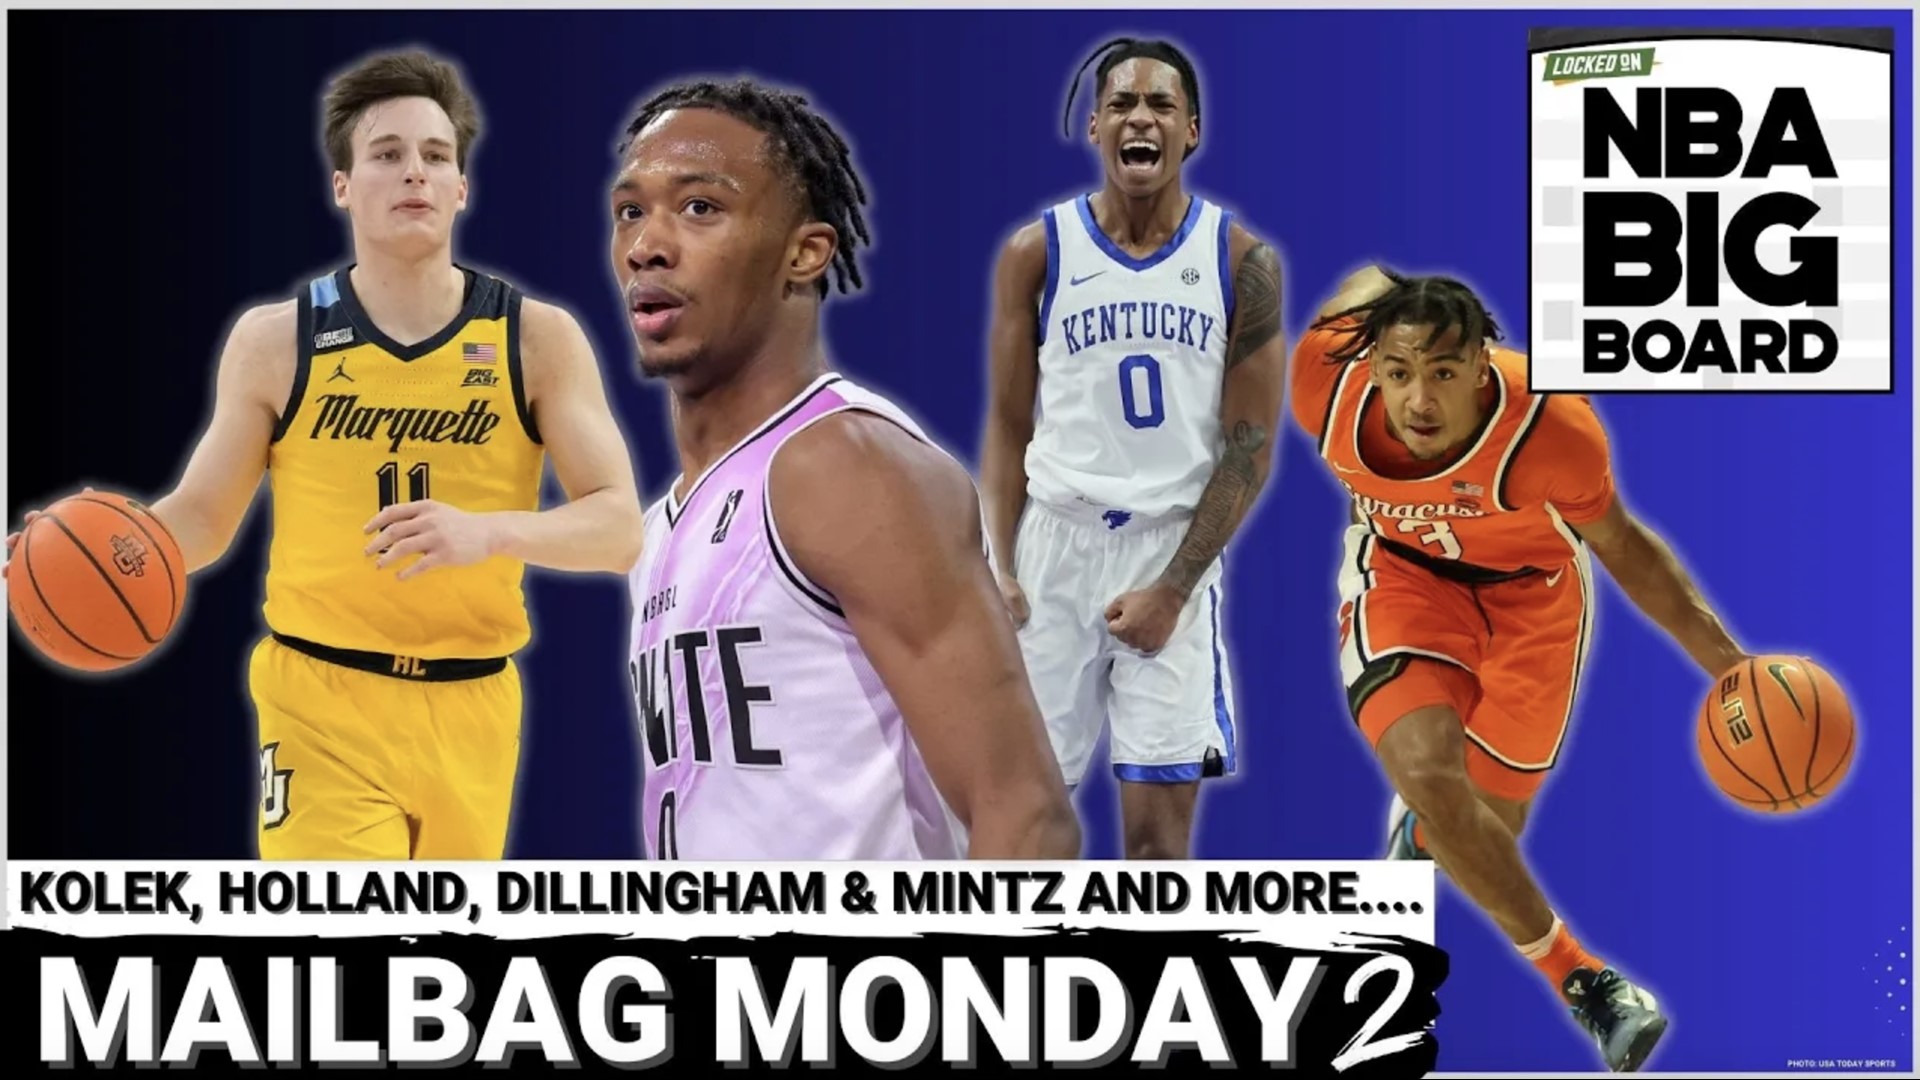 Mailbag Monday returns and Rafael Barlowe answers draft related questions from his inbox.